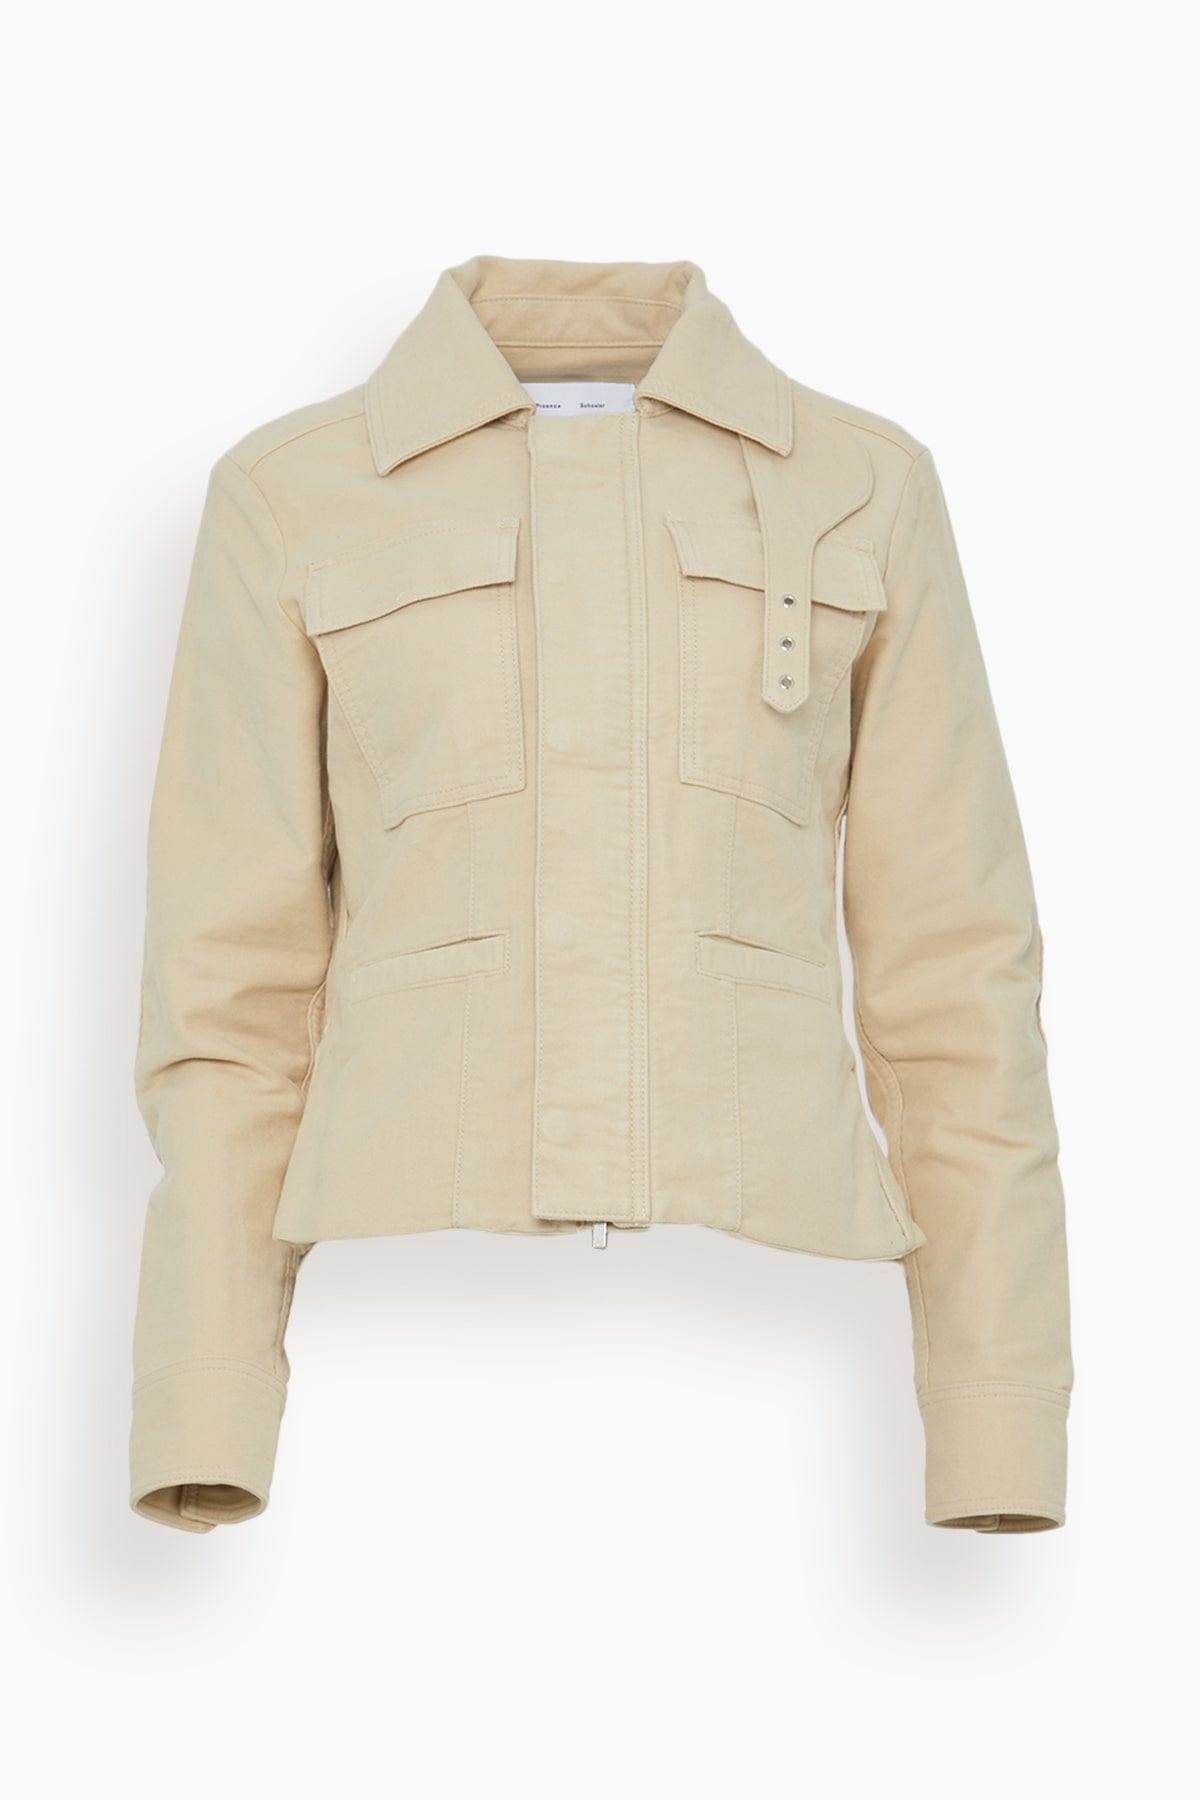 Ava Jacket in Canvas - 1